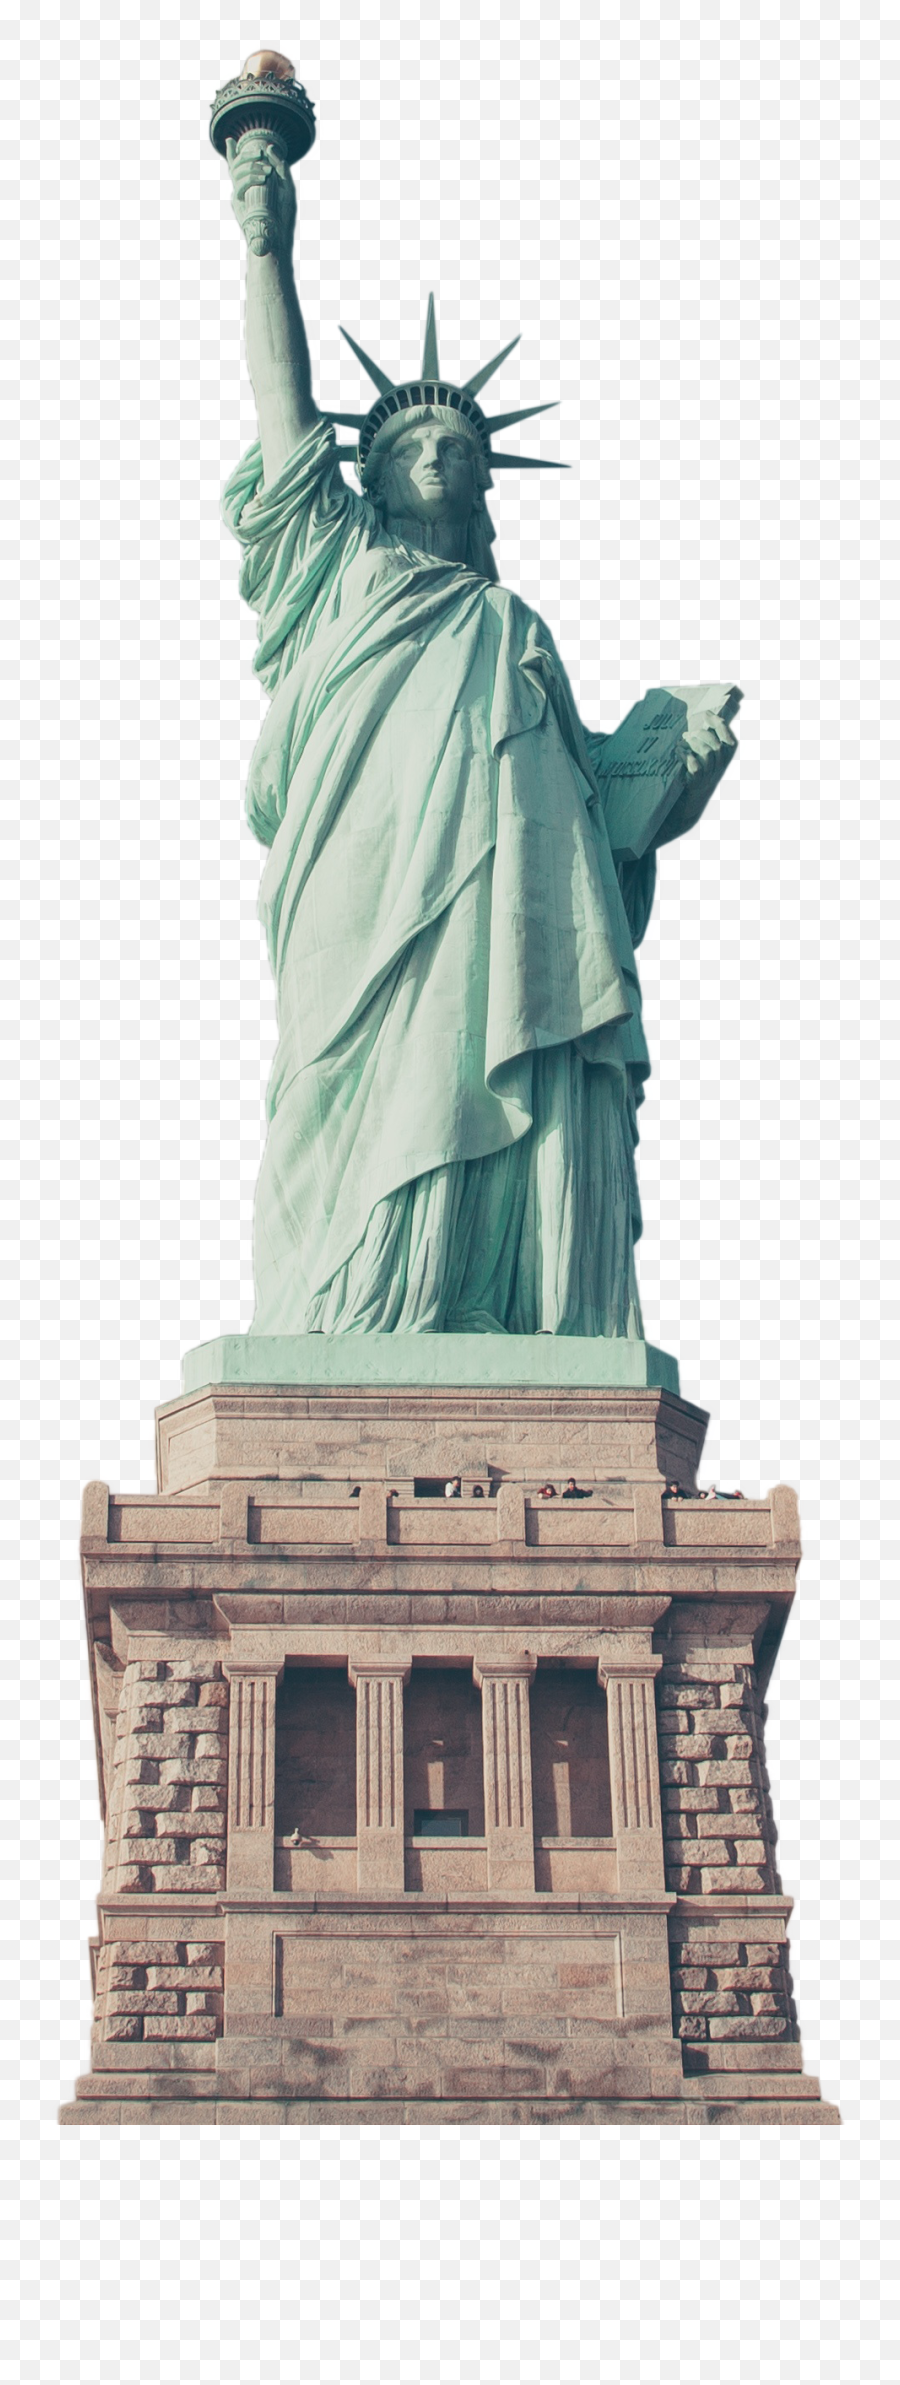 Liberty Transparent Hq Png Image - Statue Of Liberty Emoji,Statue Of Liberty Newspaper Emoji